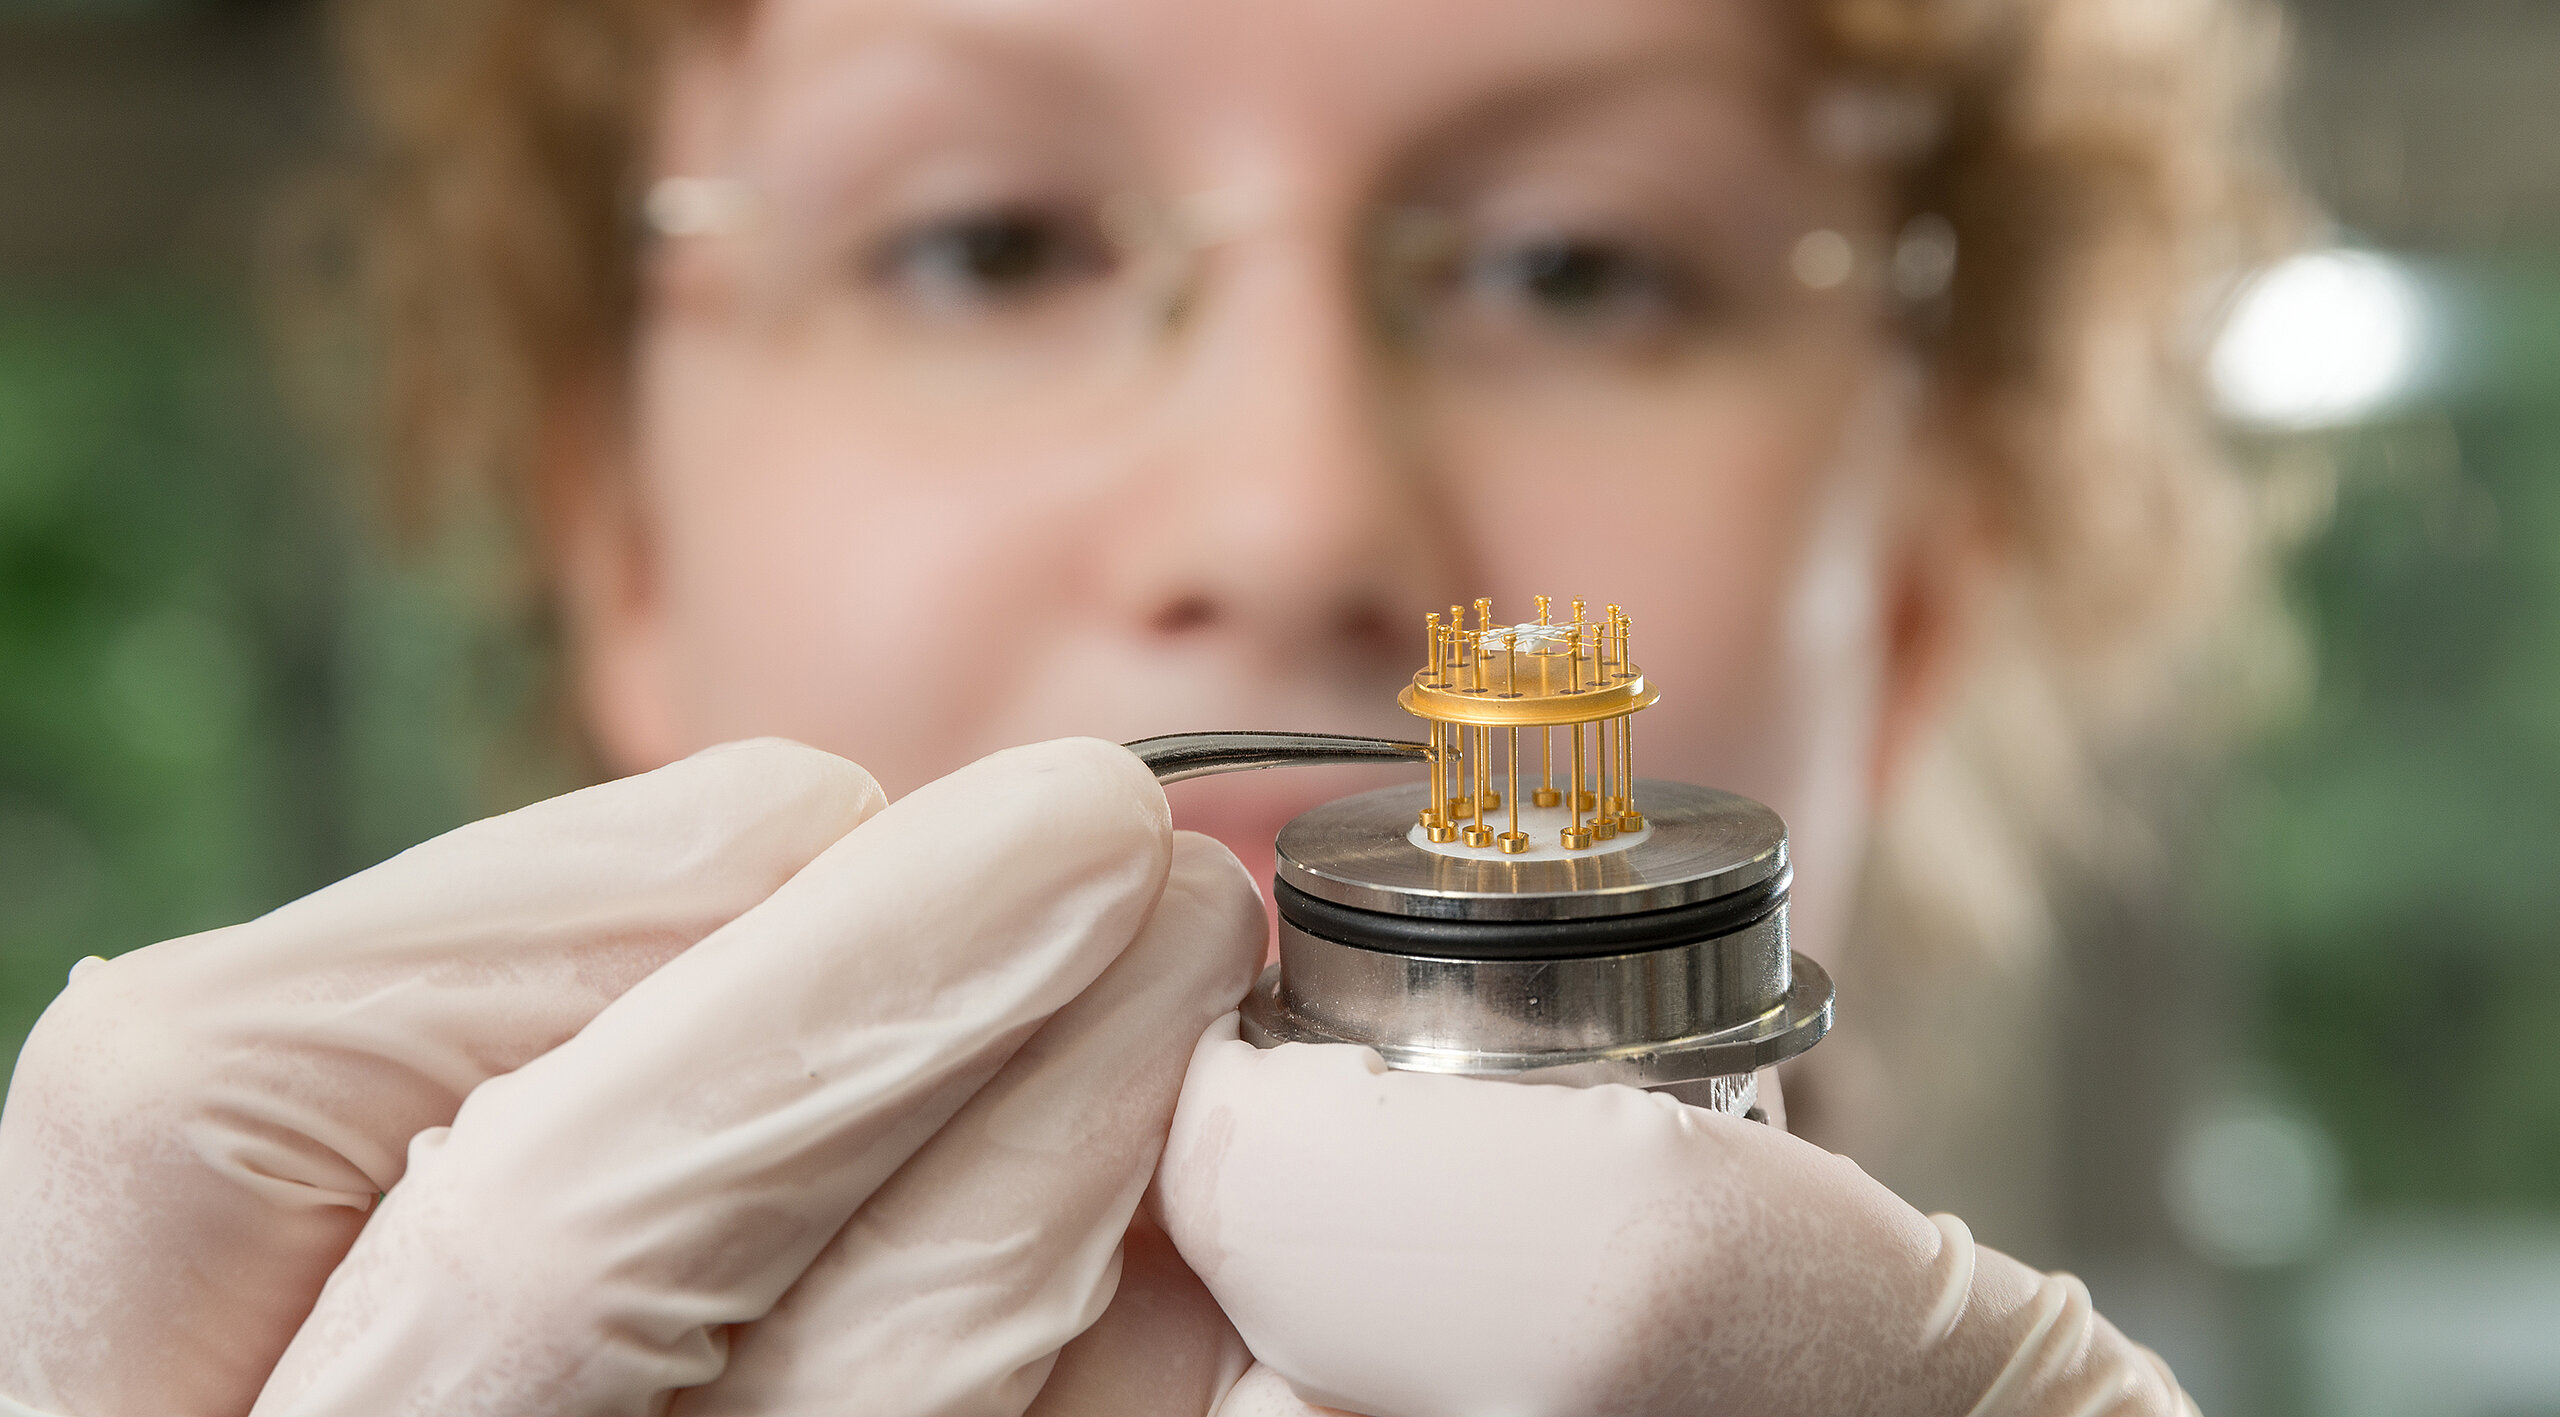 close-up of a small sensor being shown by a woman wearing medical gloves